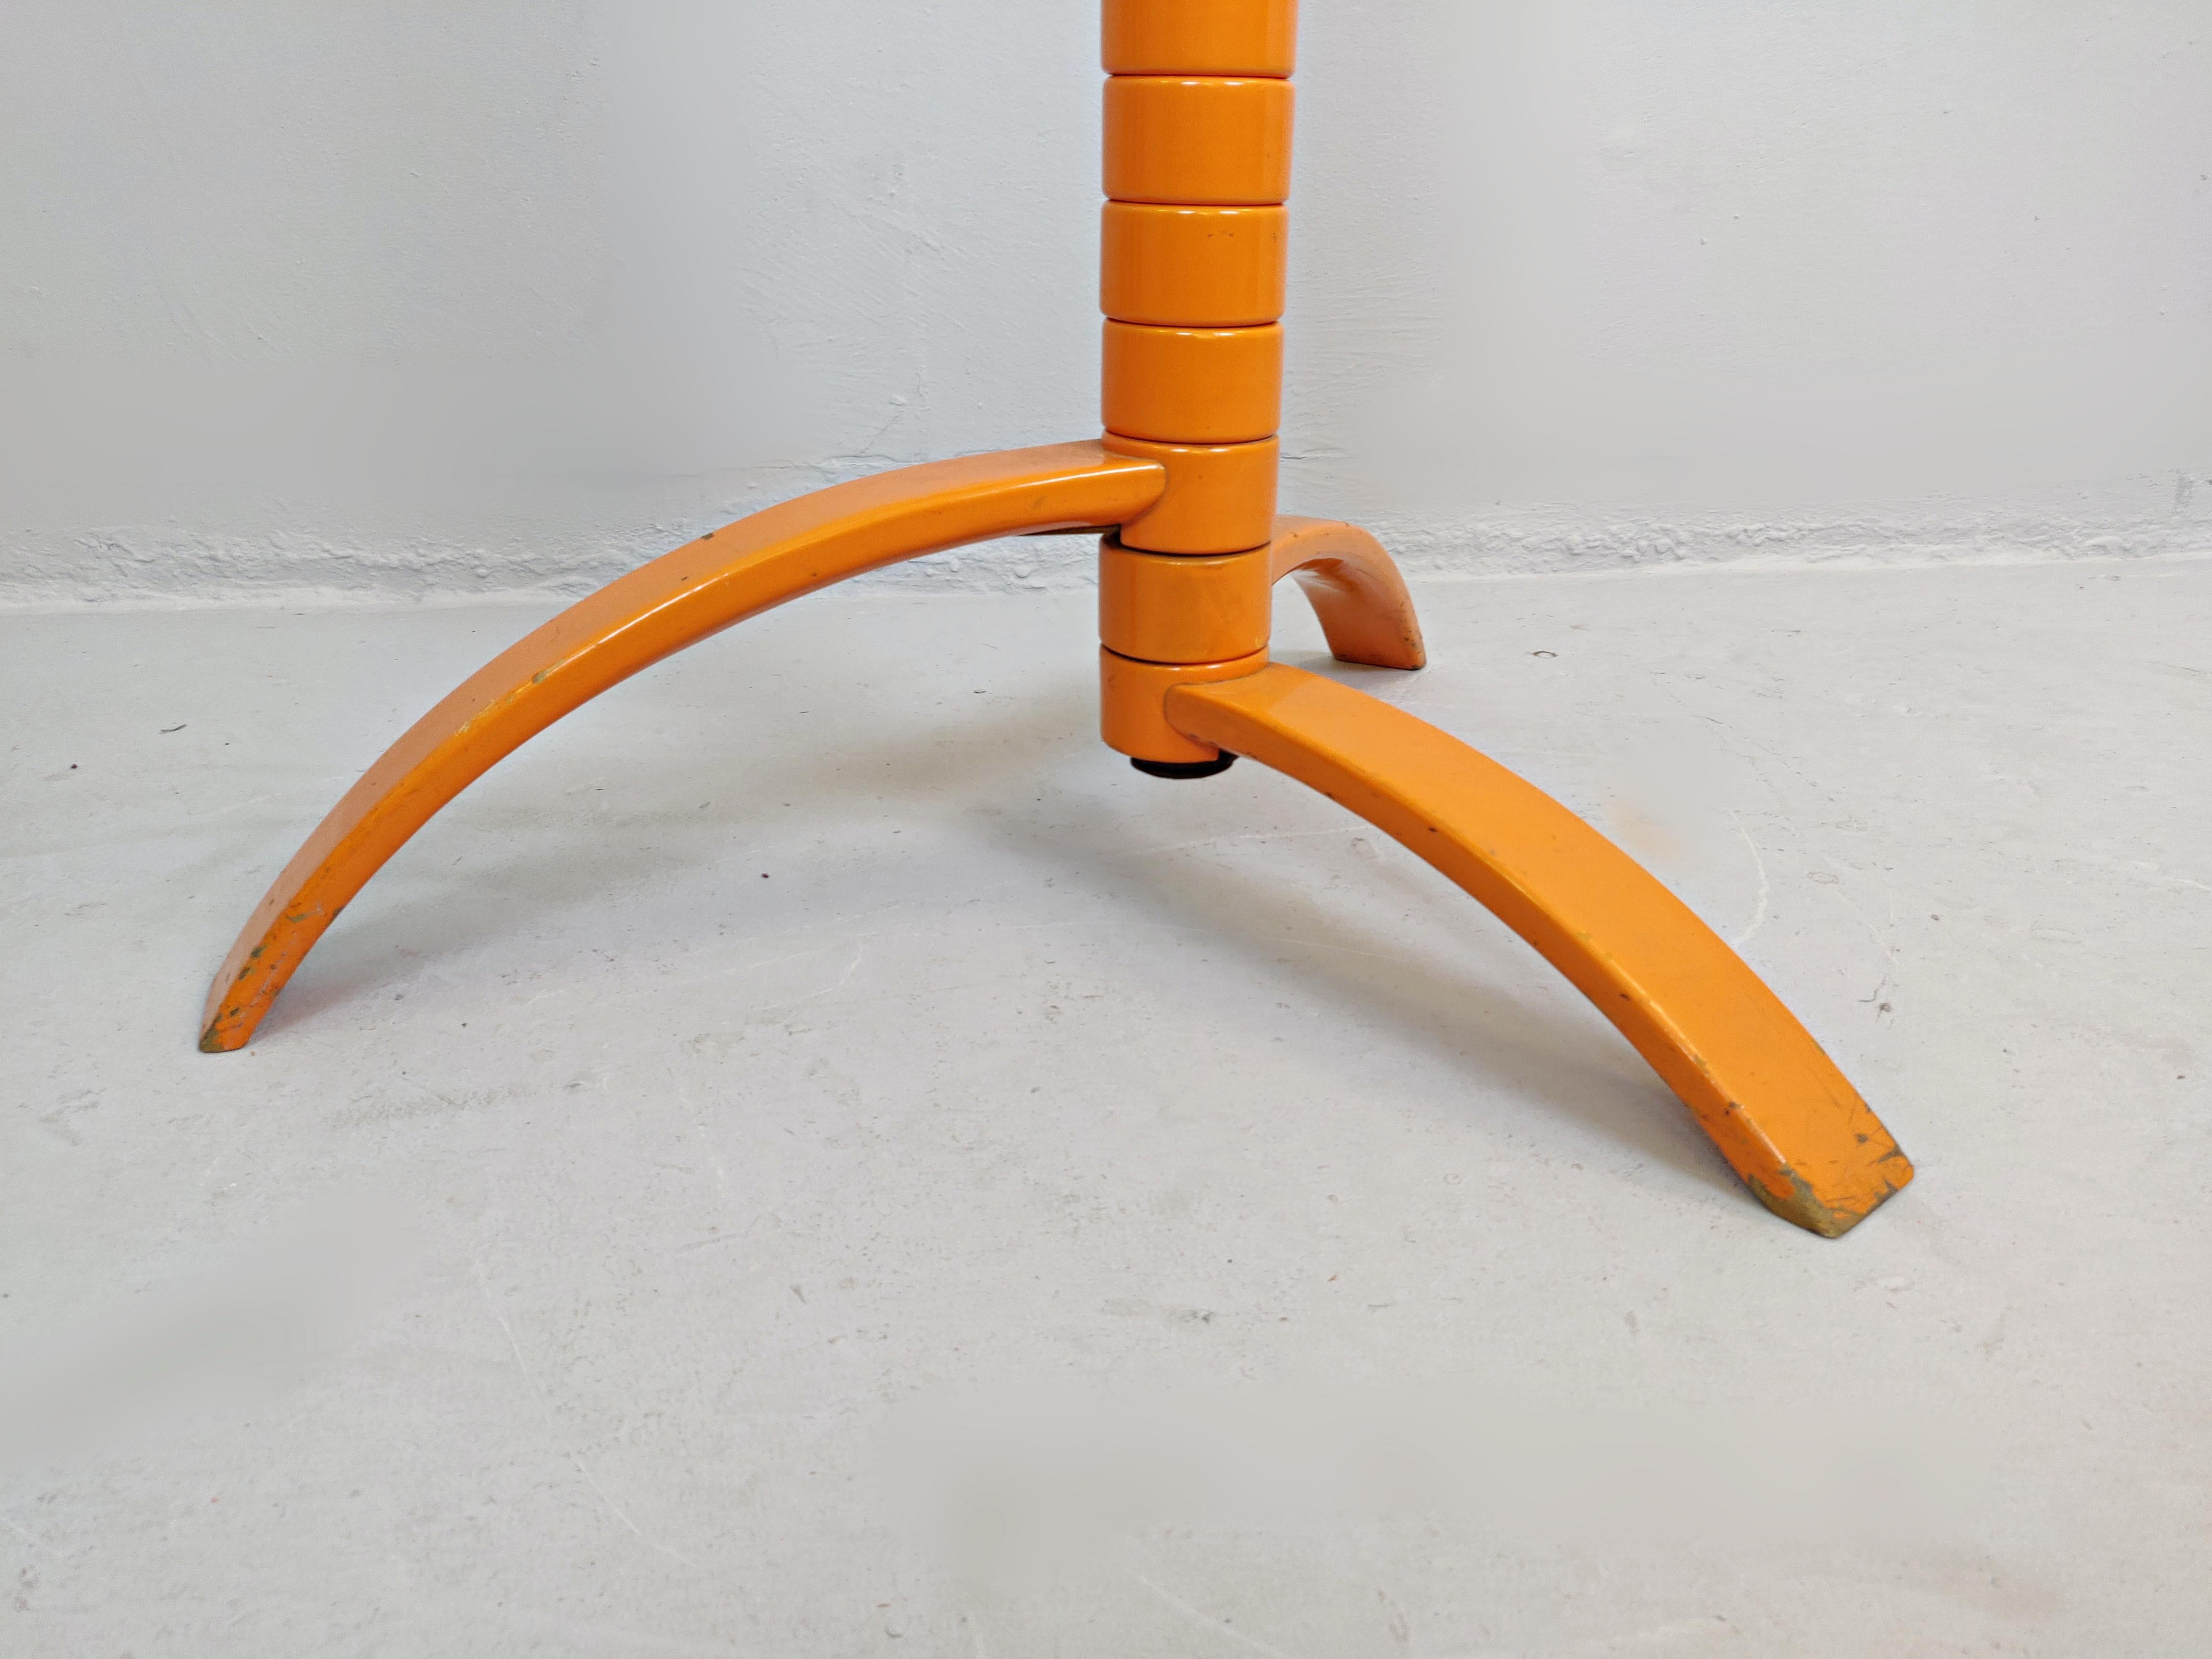 Sculptural orange lacquered wood coat rack by Bruce Tippett Renna.